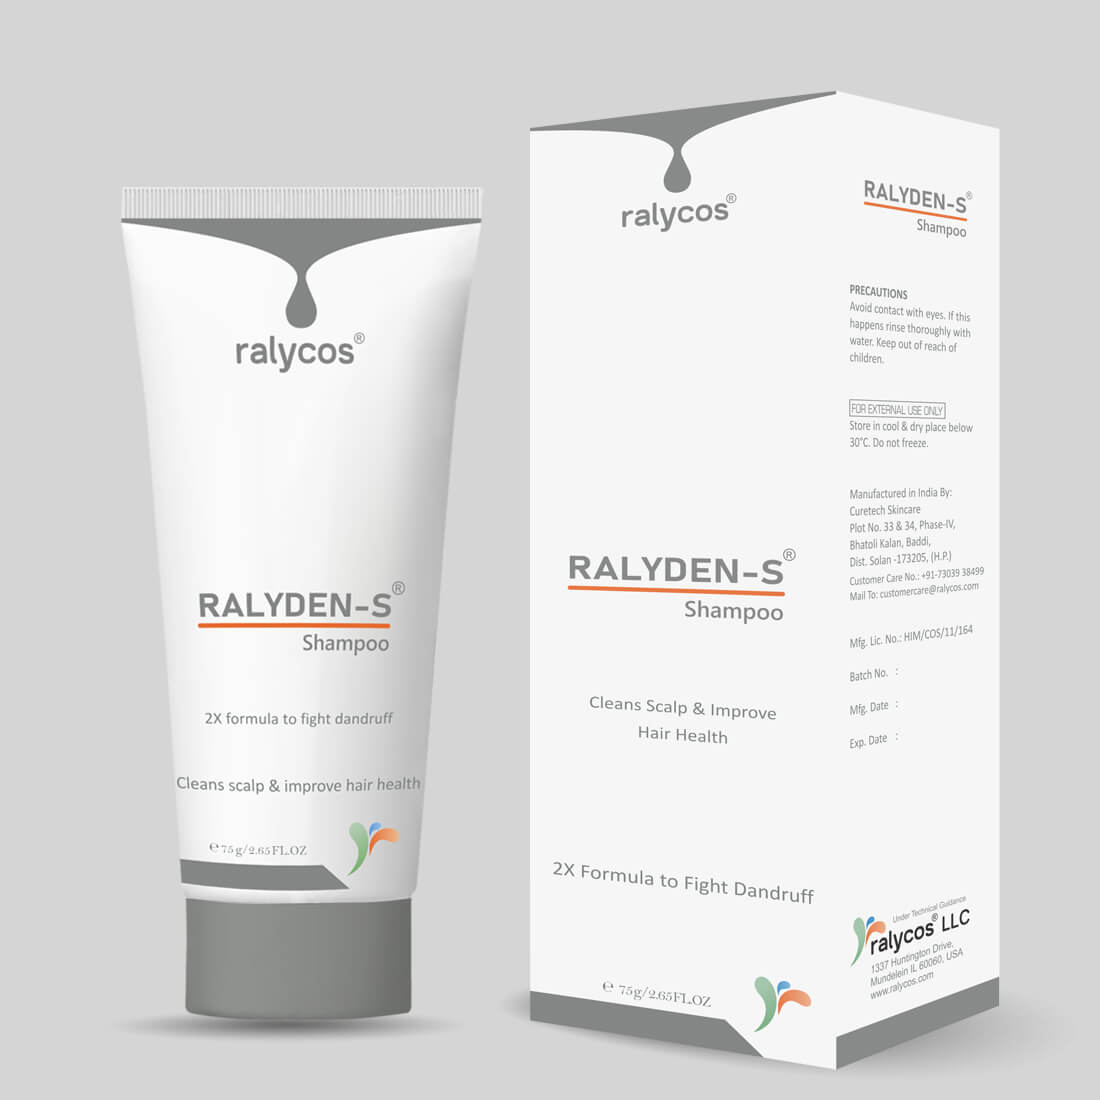 Ralycos Ralyden-S Shampoo 75gm GMRS75